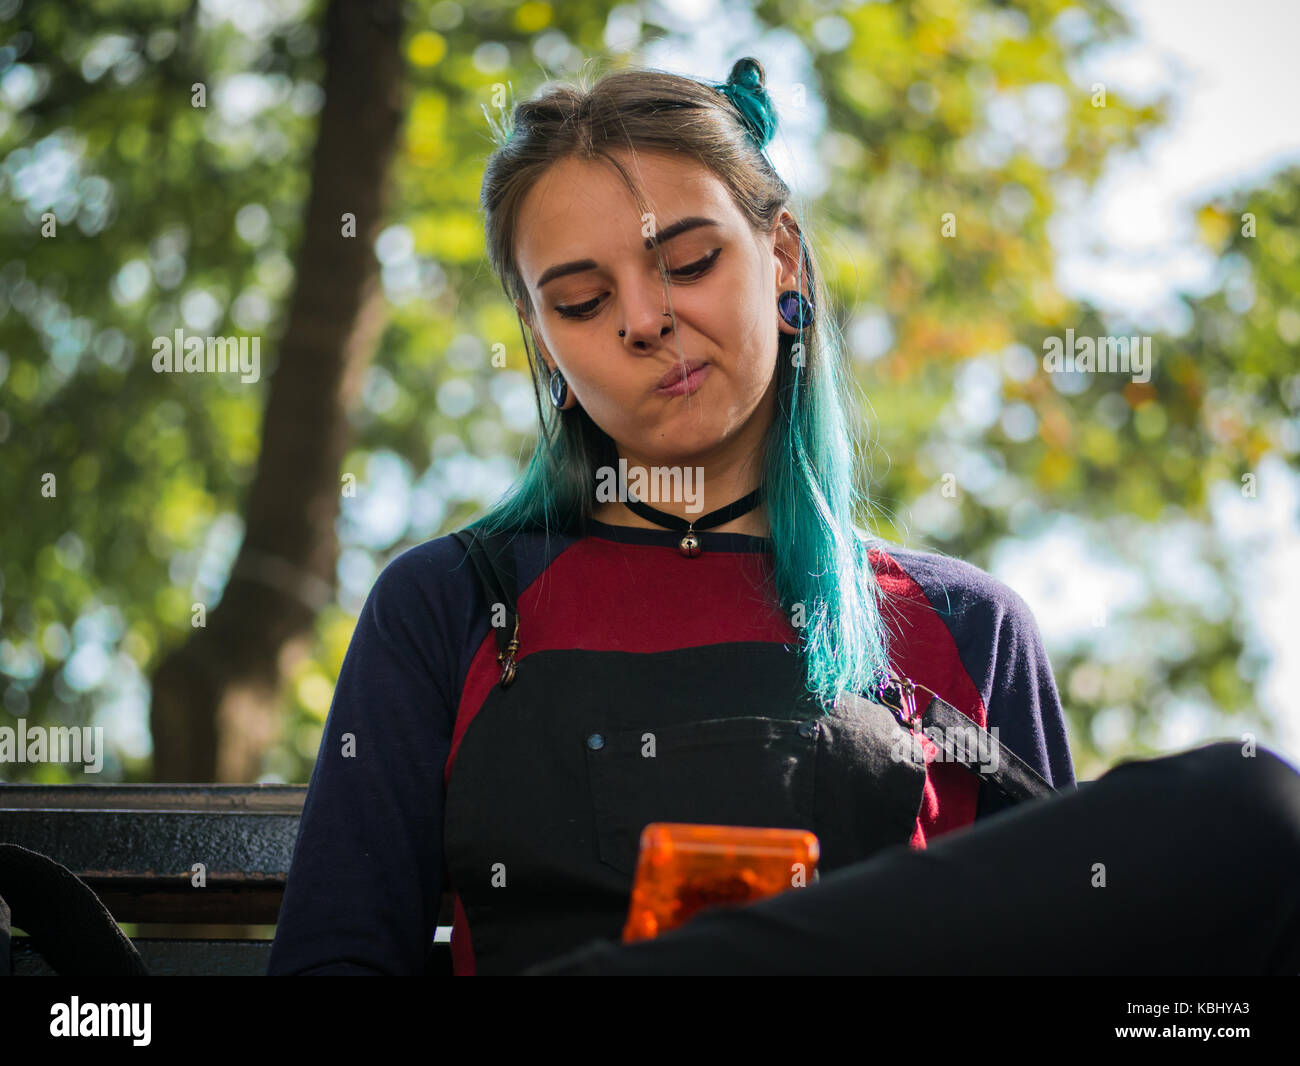 hipster girl playing tetris game in European park. Portrait of teen girl with blue dyed hair,piercing in nose,violet lenses and unusual hairstyle.Old  Stock Photo